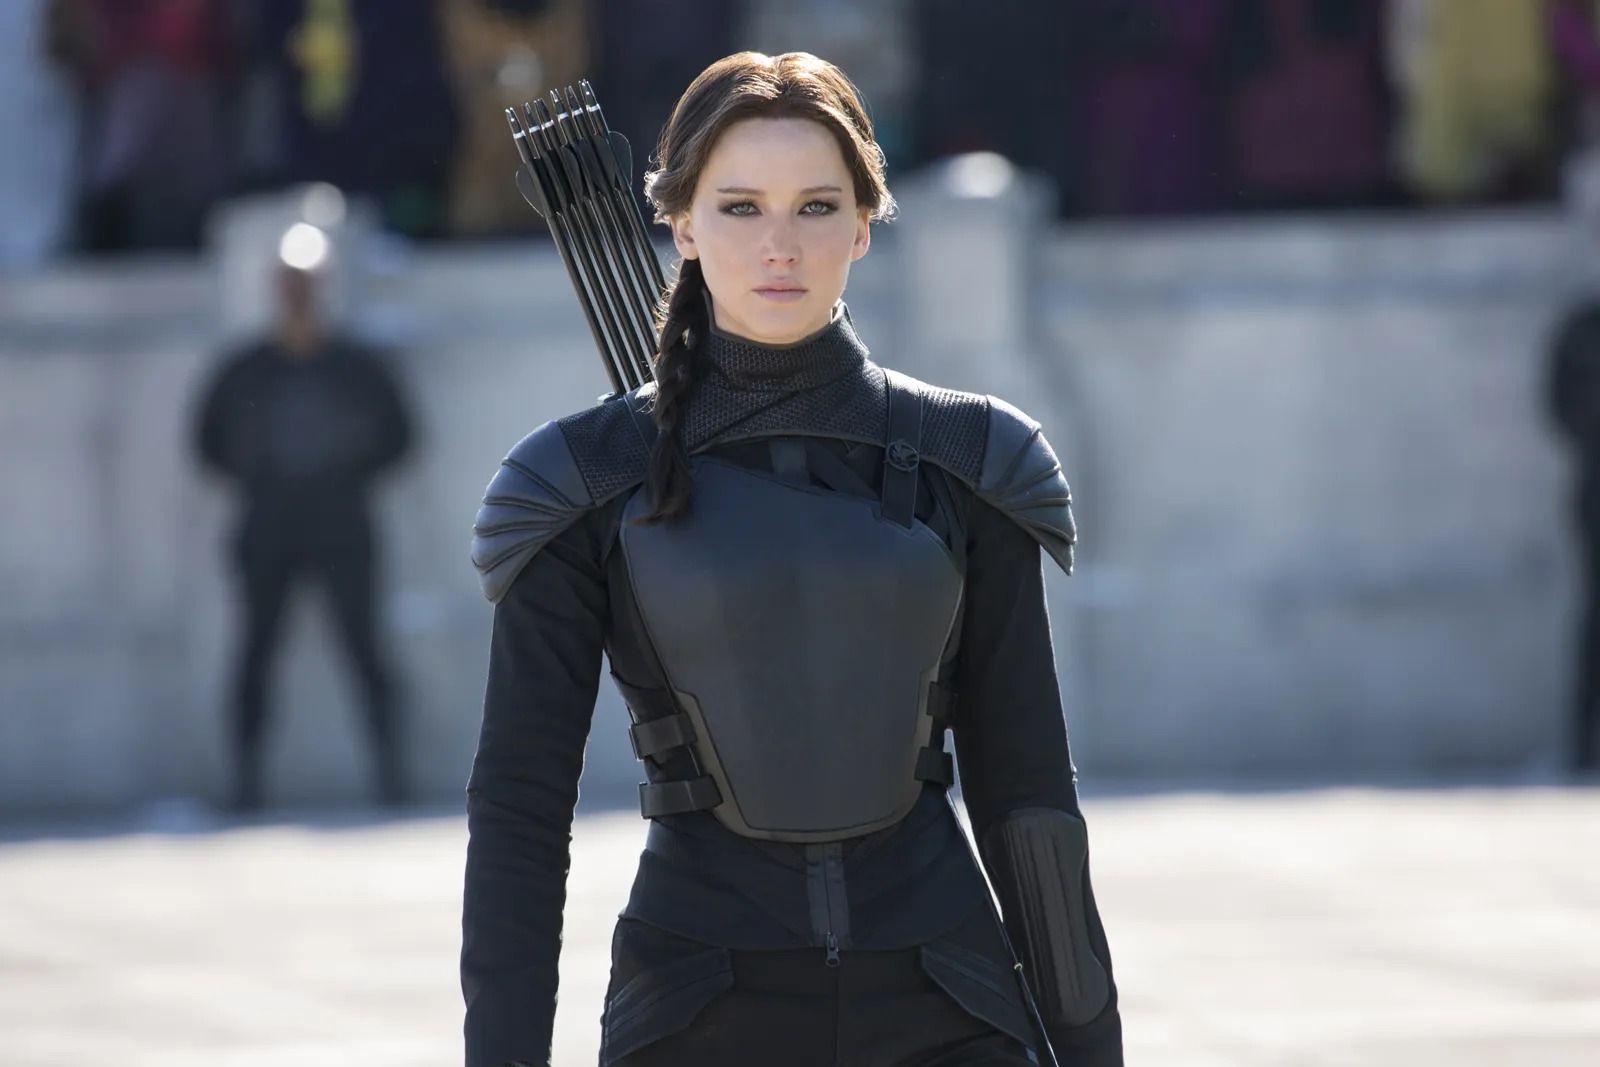 The Shocking Disrespect Katniss Showed The Capitol With Her Nightlock Berry Threat